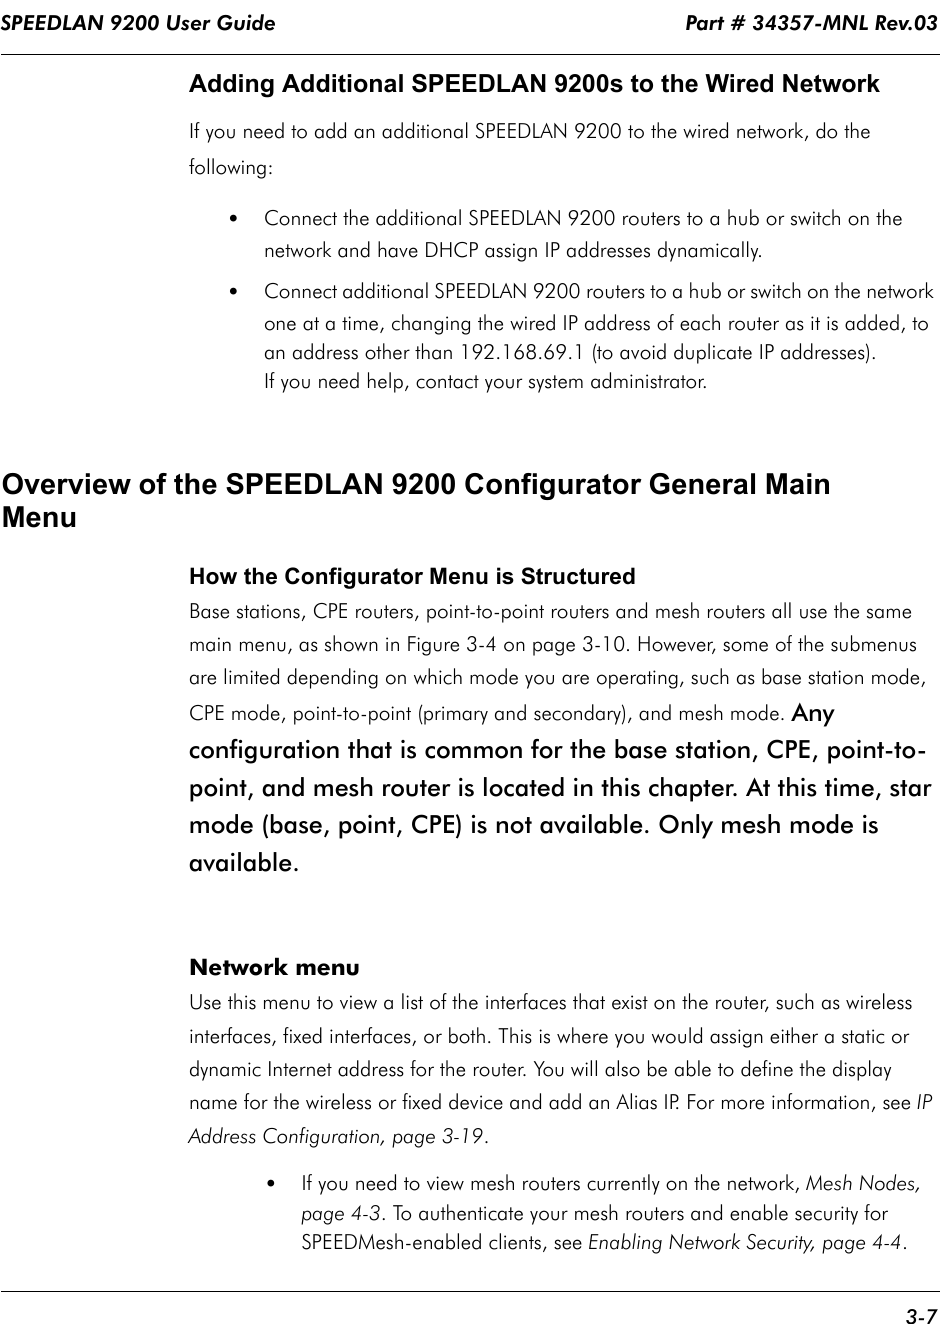 SPEEDLAN 9200 User Guide                                                                    Part # 34357-MNL Rev.03      3-7                                                                                                                                                              Adding Additional SPEEDLAN 9200s to the Wired NetworkIf you need to add an additional SPEEDLAN 9200 to the wired network, do the following:•Connect the additional SPEEDLAN 9200 routers to a hub or switch on the network and have DHCP assign IP addresses dynamically. •Connect additional SPEEDLAN 9200 routers to a hub or switch on the network one at a time, changing the wired IP address of each router as it is added, to an address other than 192.168.69.1 (to avoid duplicate IP addresses).  If you need help, contact your system administrator.Overview of the SPEEDLAN 9200 Configurator General Main MenuHow the Configurator Menu is StructuredBase stations, CPE routers, point-to-point routers and mesh routers all use the same main menu, as shown in Figure 3-4 on page 3-10. However, some of the submenus are limited depending on which mode you are operating, such as base station mode, CPE mode, point-to-point (primary and secondary), and mesh mode. Any configuration that is common for the base station, CPE, point-to-point, and mesh router is located in this chapter. At this time, star mode (base, point, CPE) is not available. Only mesh mode is available.  Network menuUse this menu to view a list of the interfaces that exist on the router, such as wireless interfaces, fixed interfaces, or both. This is where you would assign either a static or dynamic Internet address for the router. You will also be able to define the display name for the wireless or fixed device and add an Alias IP. For more information, see IP Address Configuration, page 3-19. •If you need to view mesh routers currently on the network, Mesh Nodes, page 4-3. To authenticate your mesh routers and enable security for SPEEDMesh-enabled clients, see Enabling Network Security, page 4-4.   